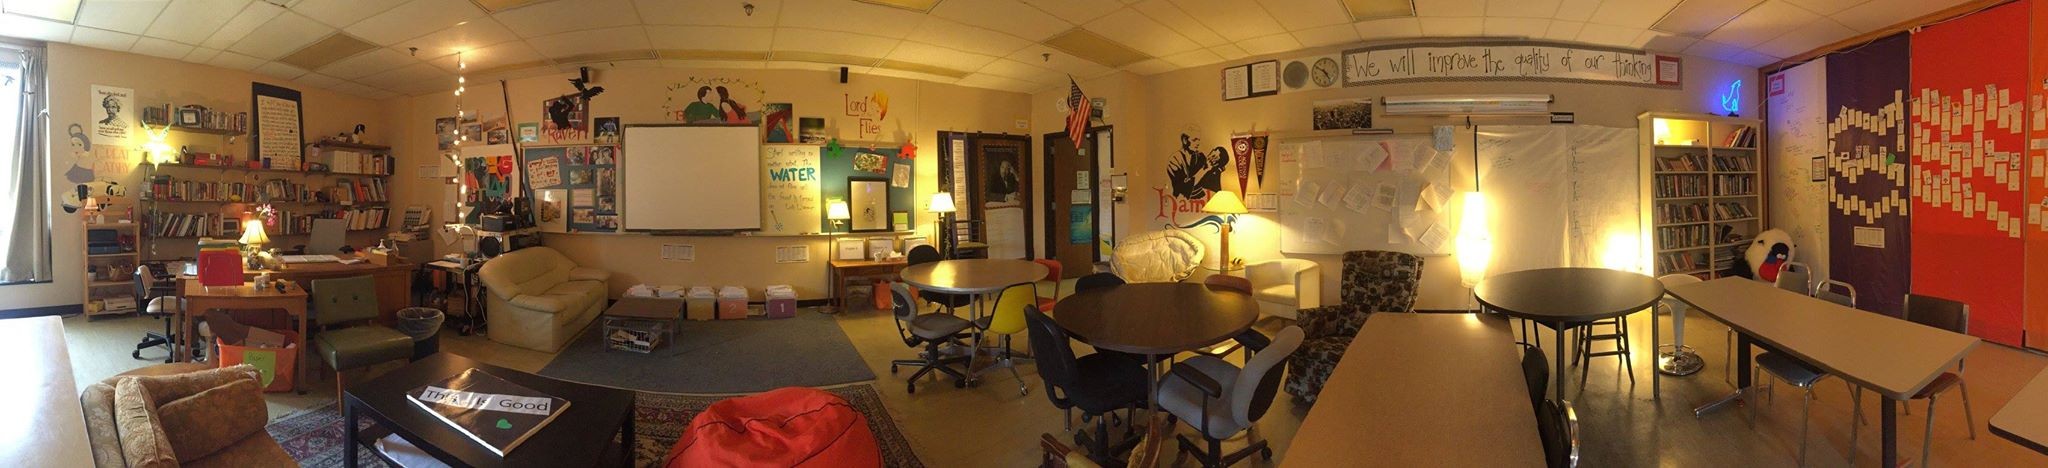 Classroom Eye Candy 2: The Learning Lounge